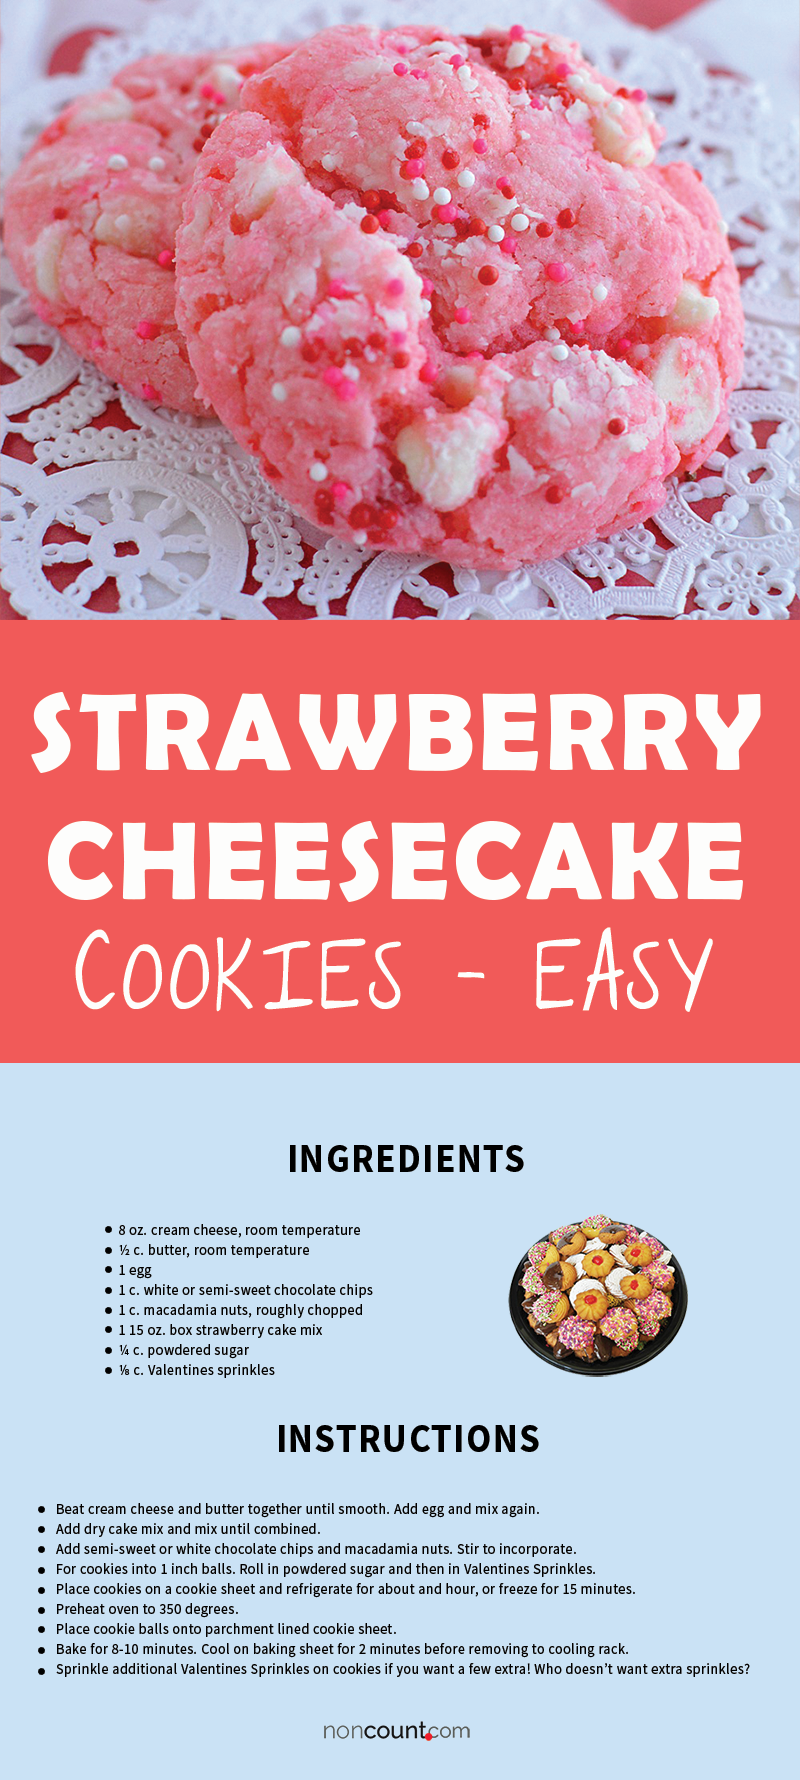 Recipe Image of Strawberry Cheesecake Cookies – Easy